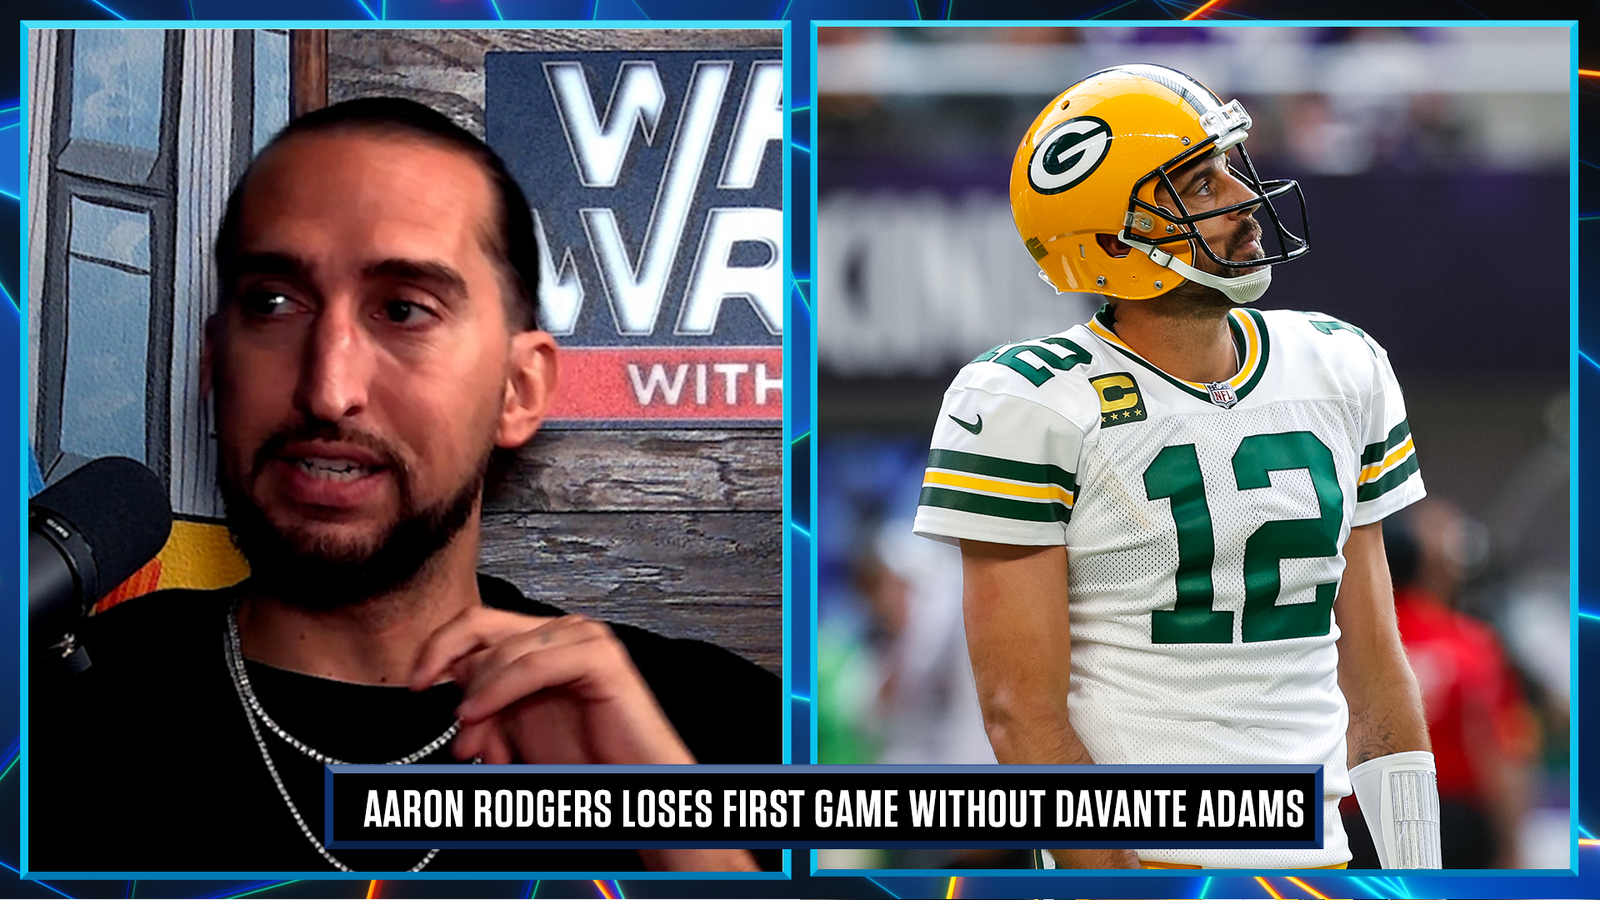 Aaron Rodgers' inability to deal with frustration is a concern for Packers